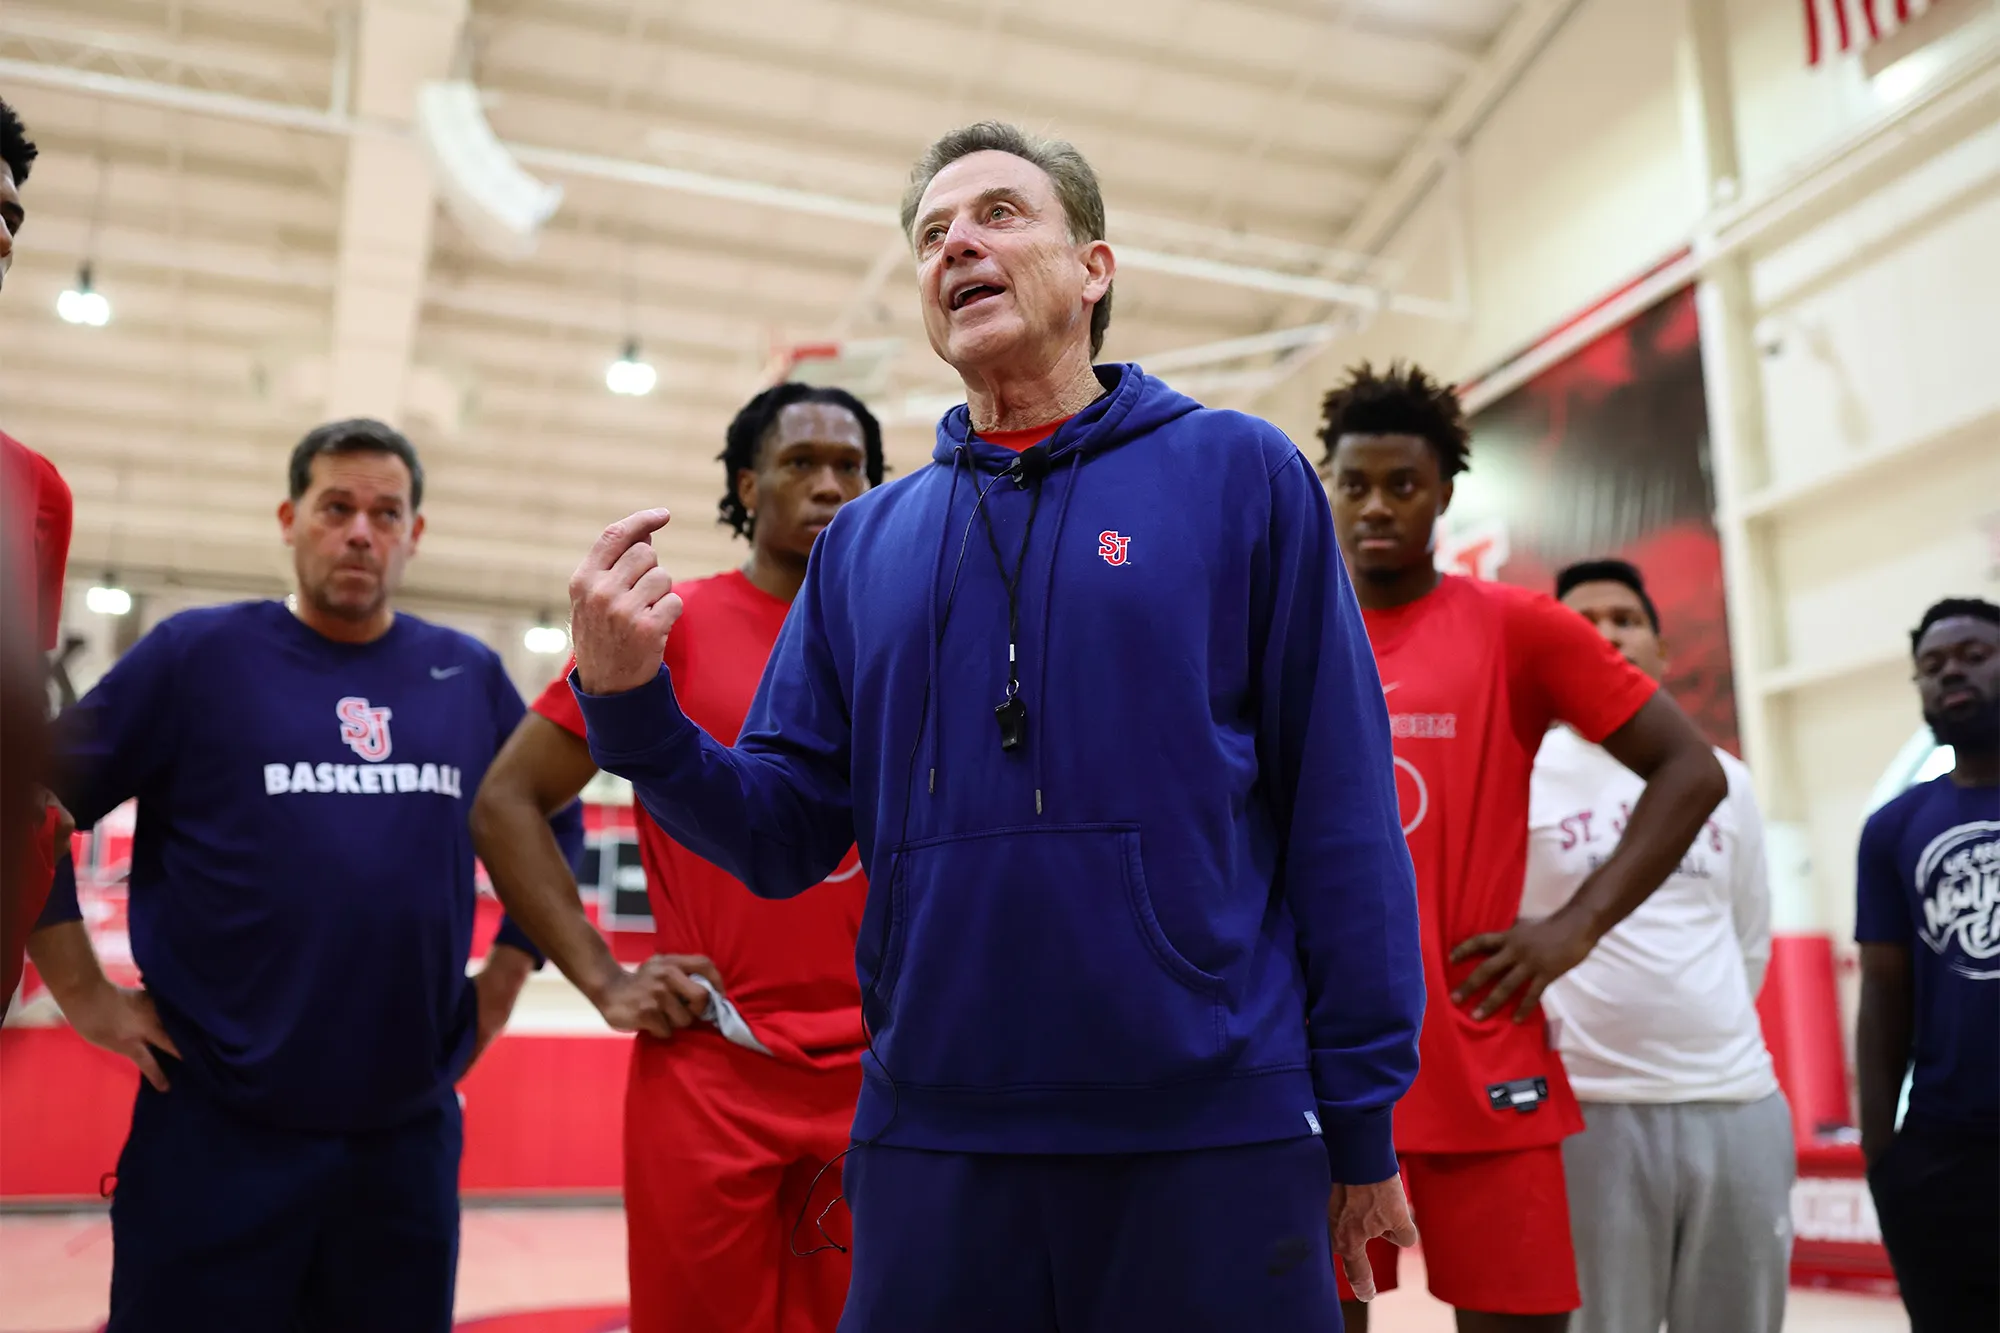 Rick Pitino coaching St. John’s basketball players during a practice in Taffner Fieldhouse